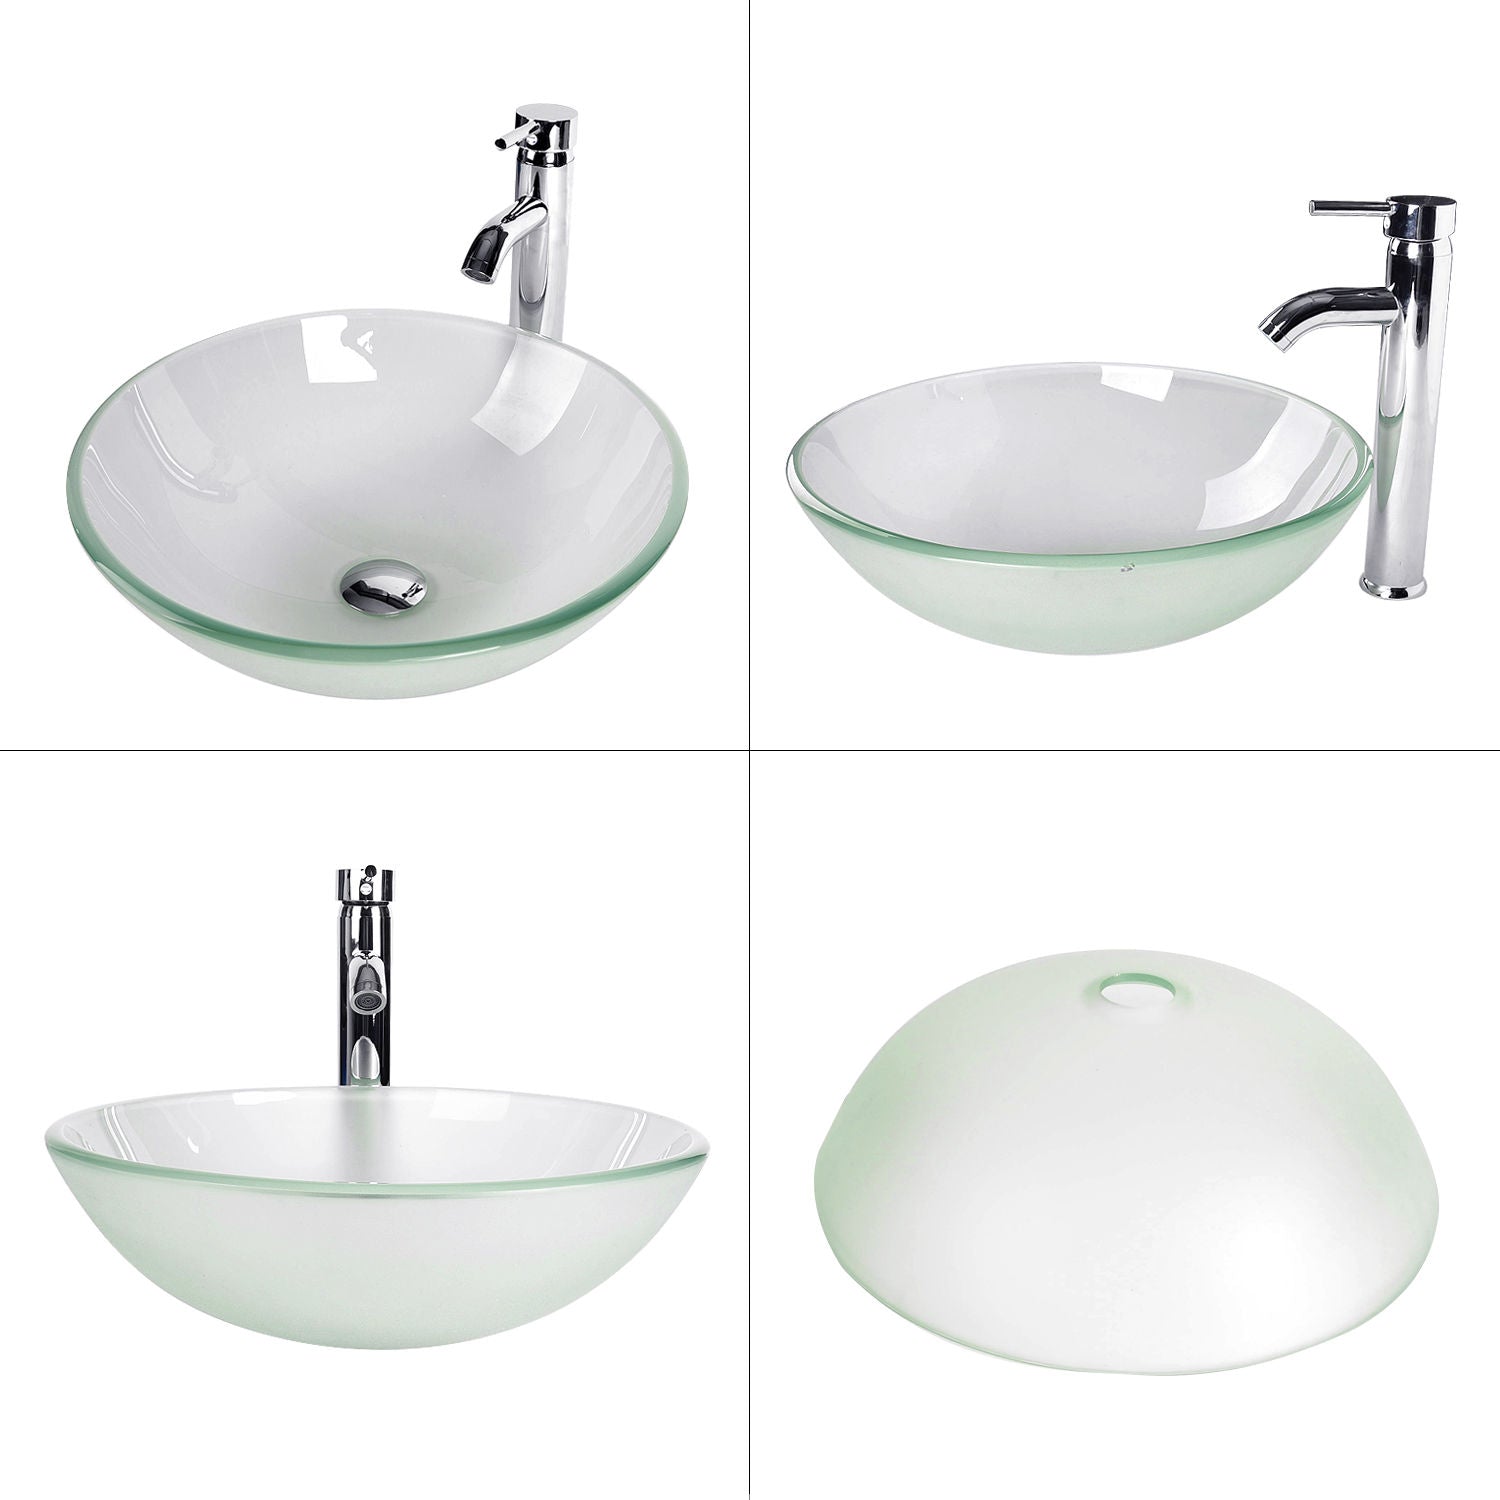 4 angles of Elecwish frost round sink